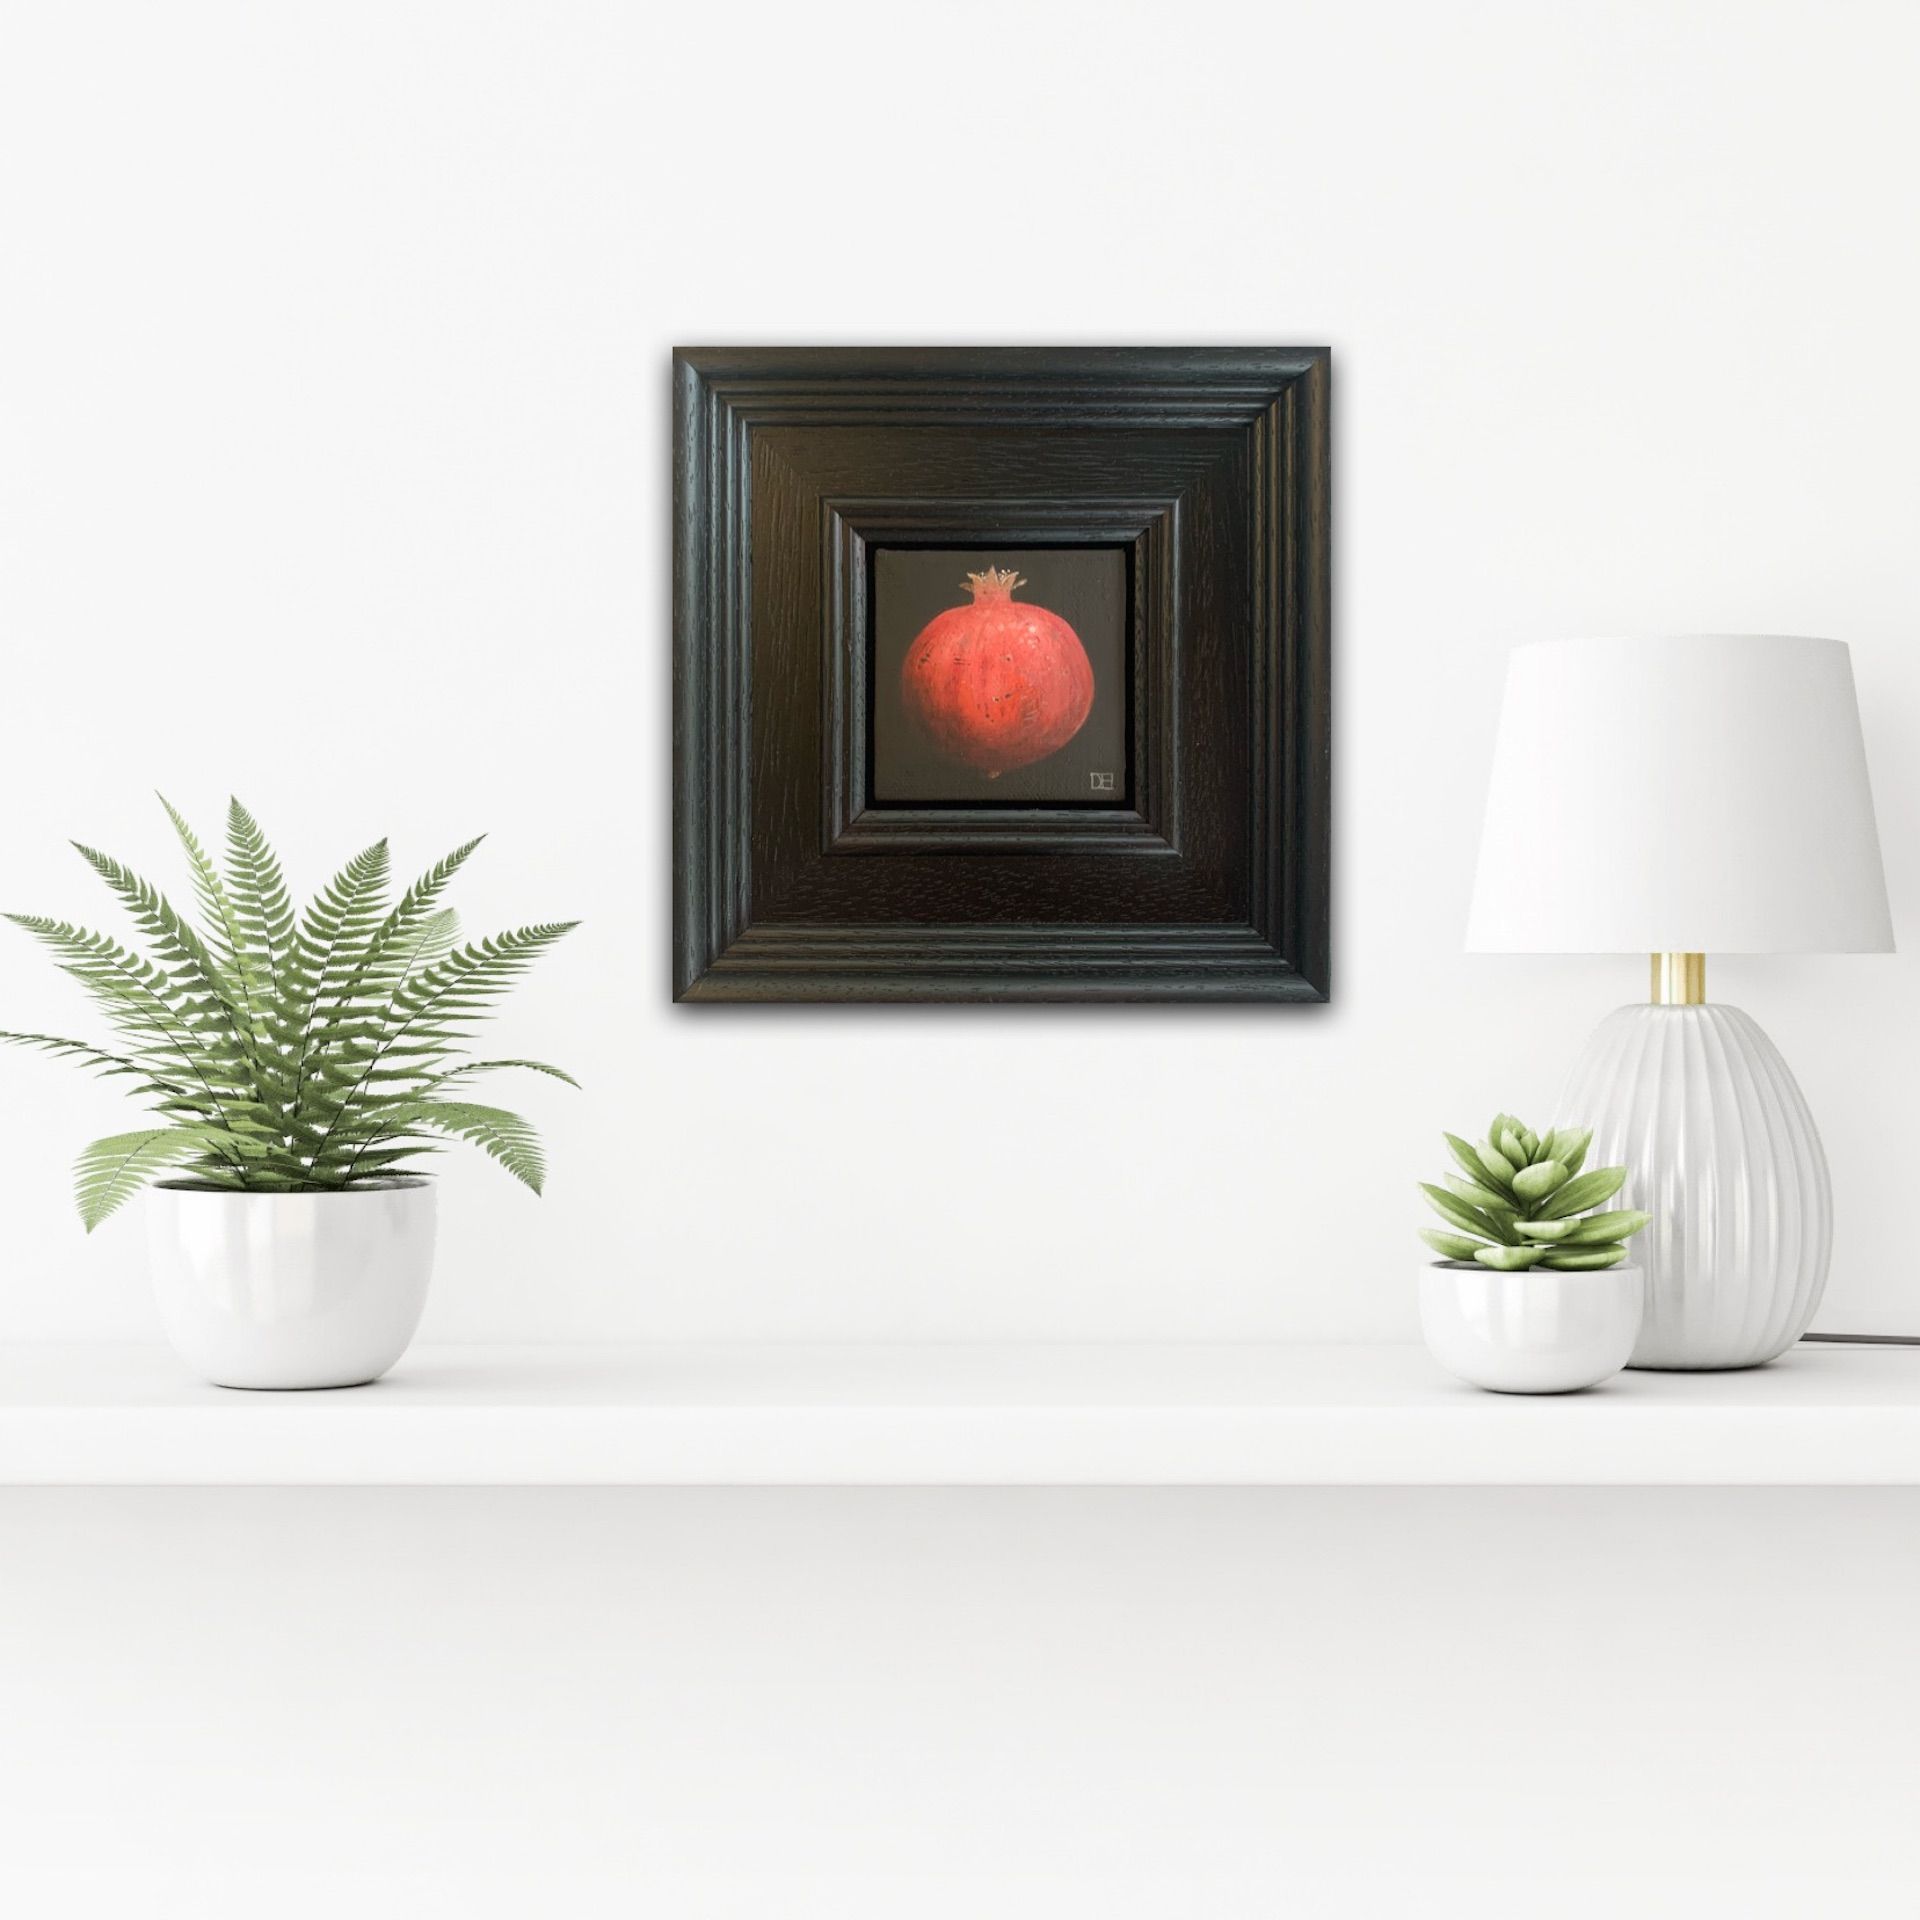 Pocket Red Pomegranate by Dani Humberstone - Secondary Image